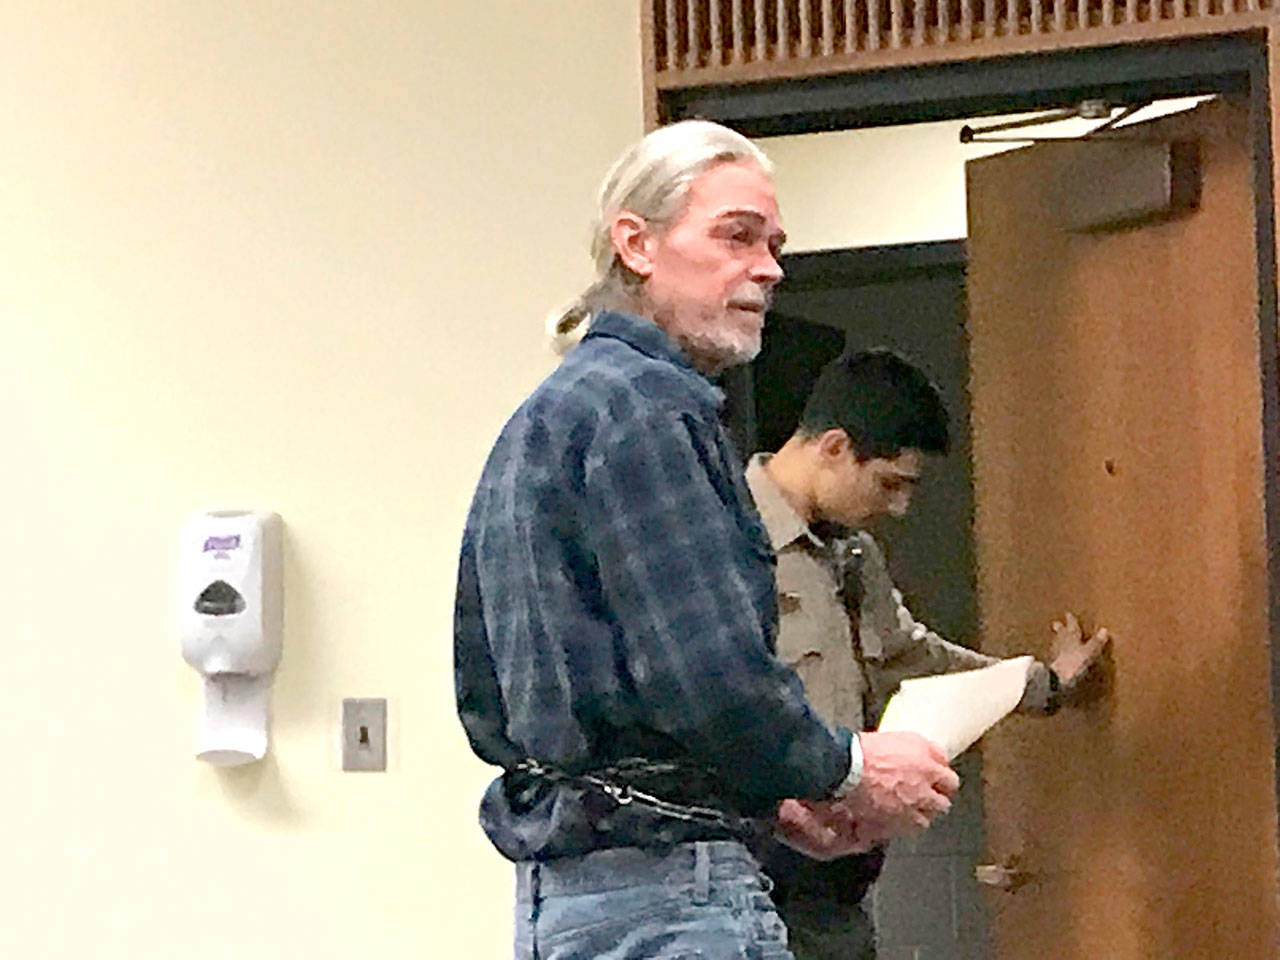 Gary Blanton headed back to jail Monday after a first appearance in Clallam County Superior Court for allegedly shooting at a neighbor’s house. (Paul Gottlieb/Peninsula Daily News)